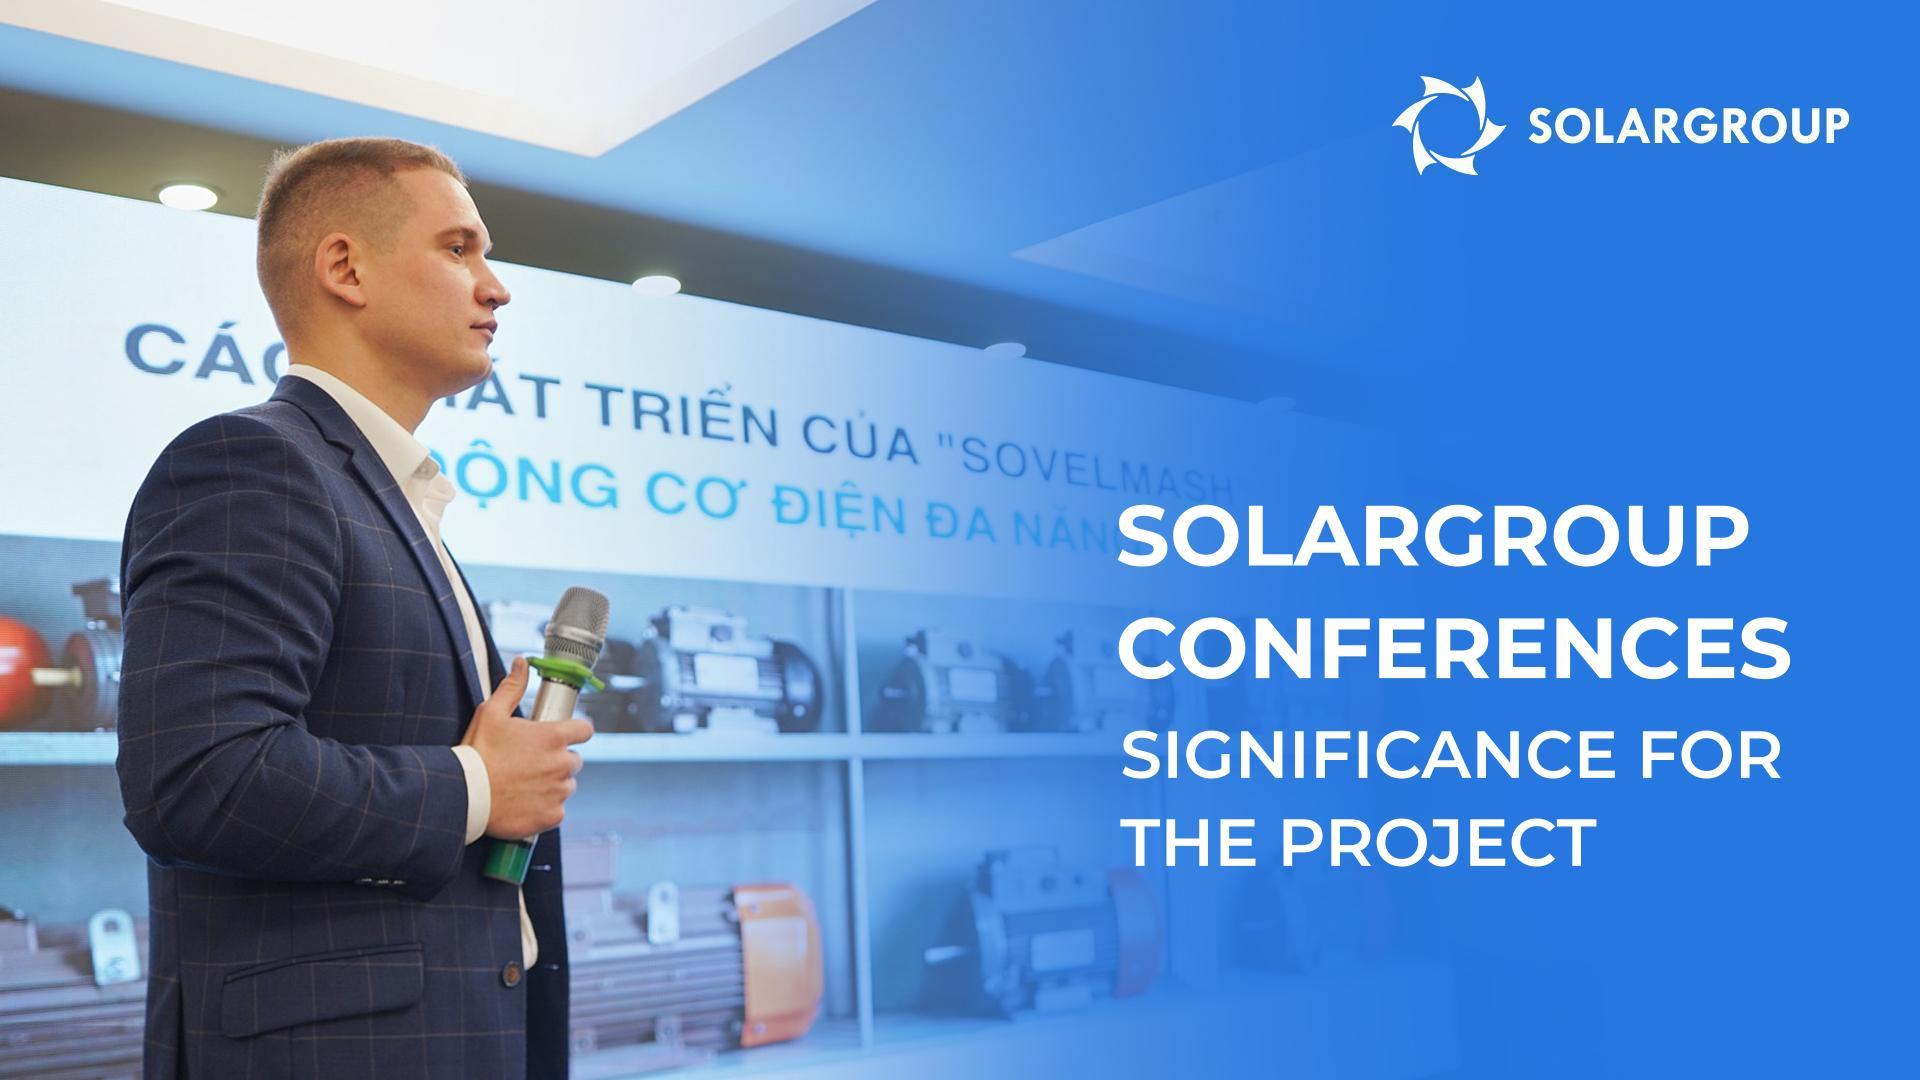 SOLARGROUP conferences: their significance for project development